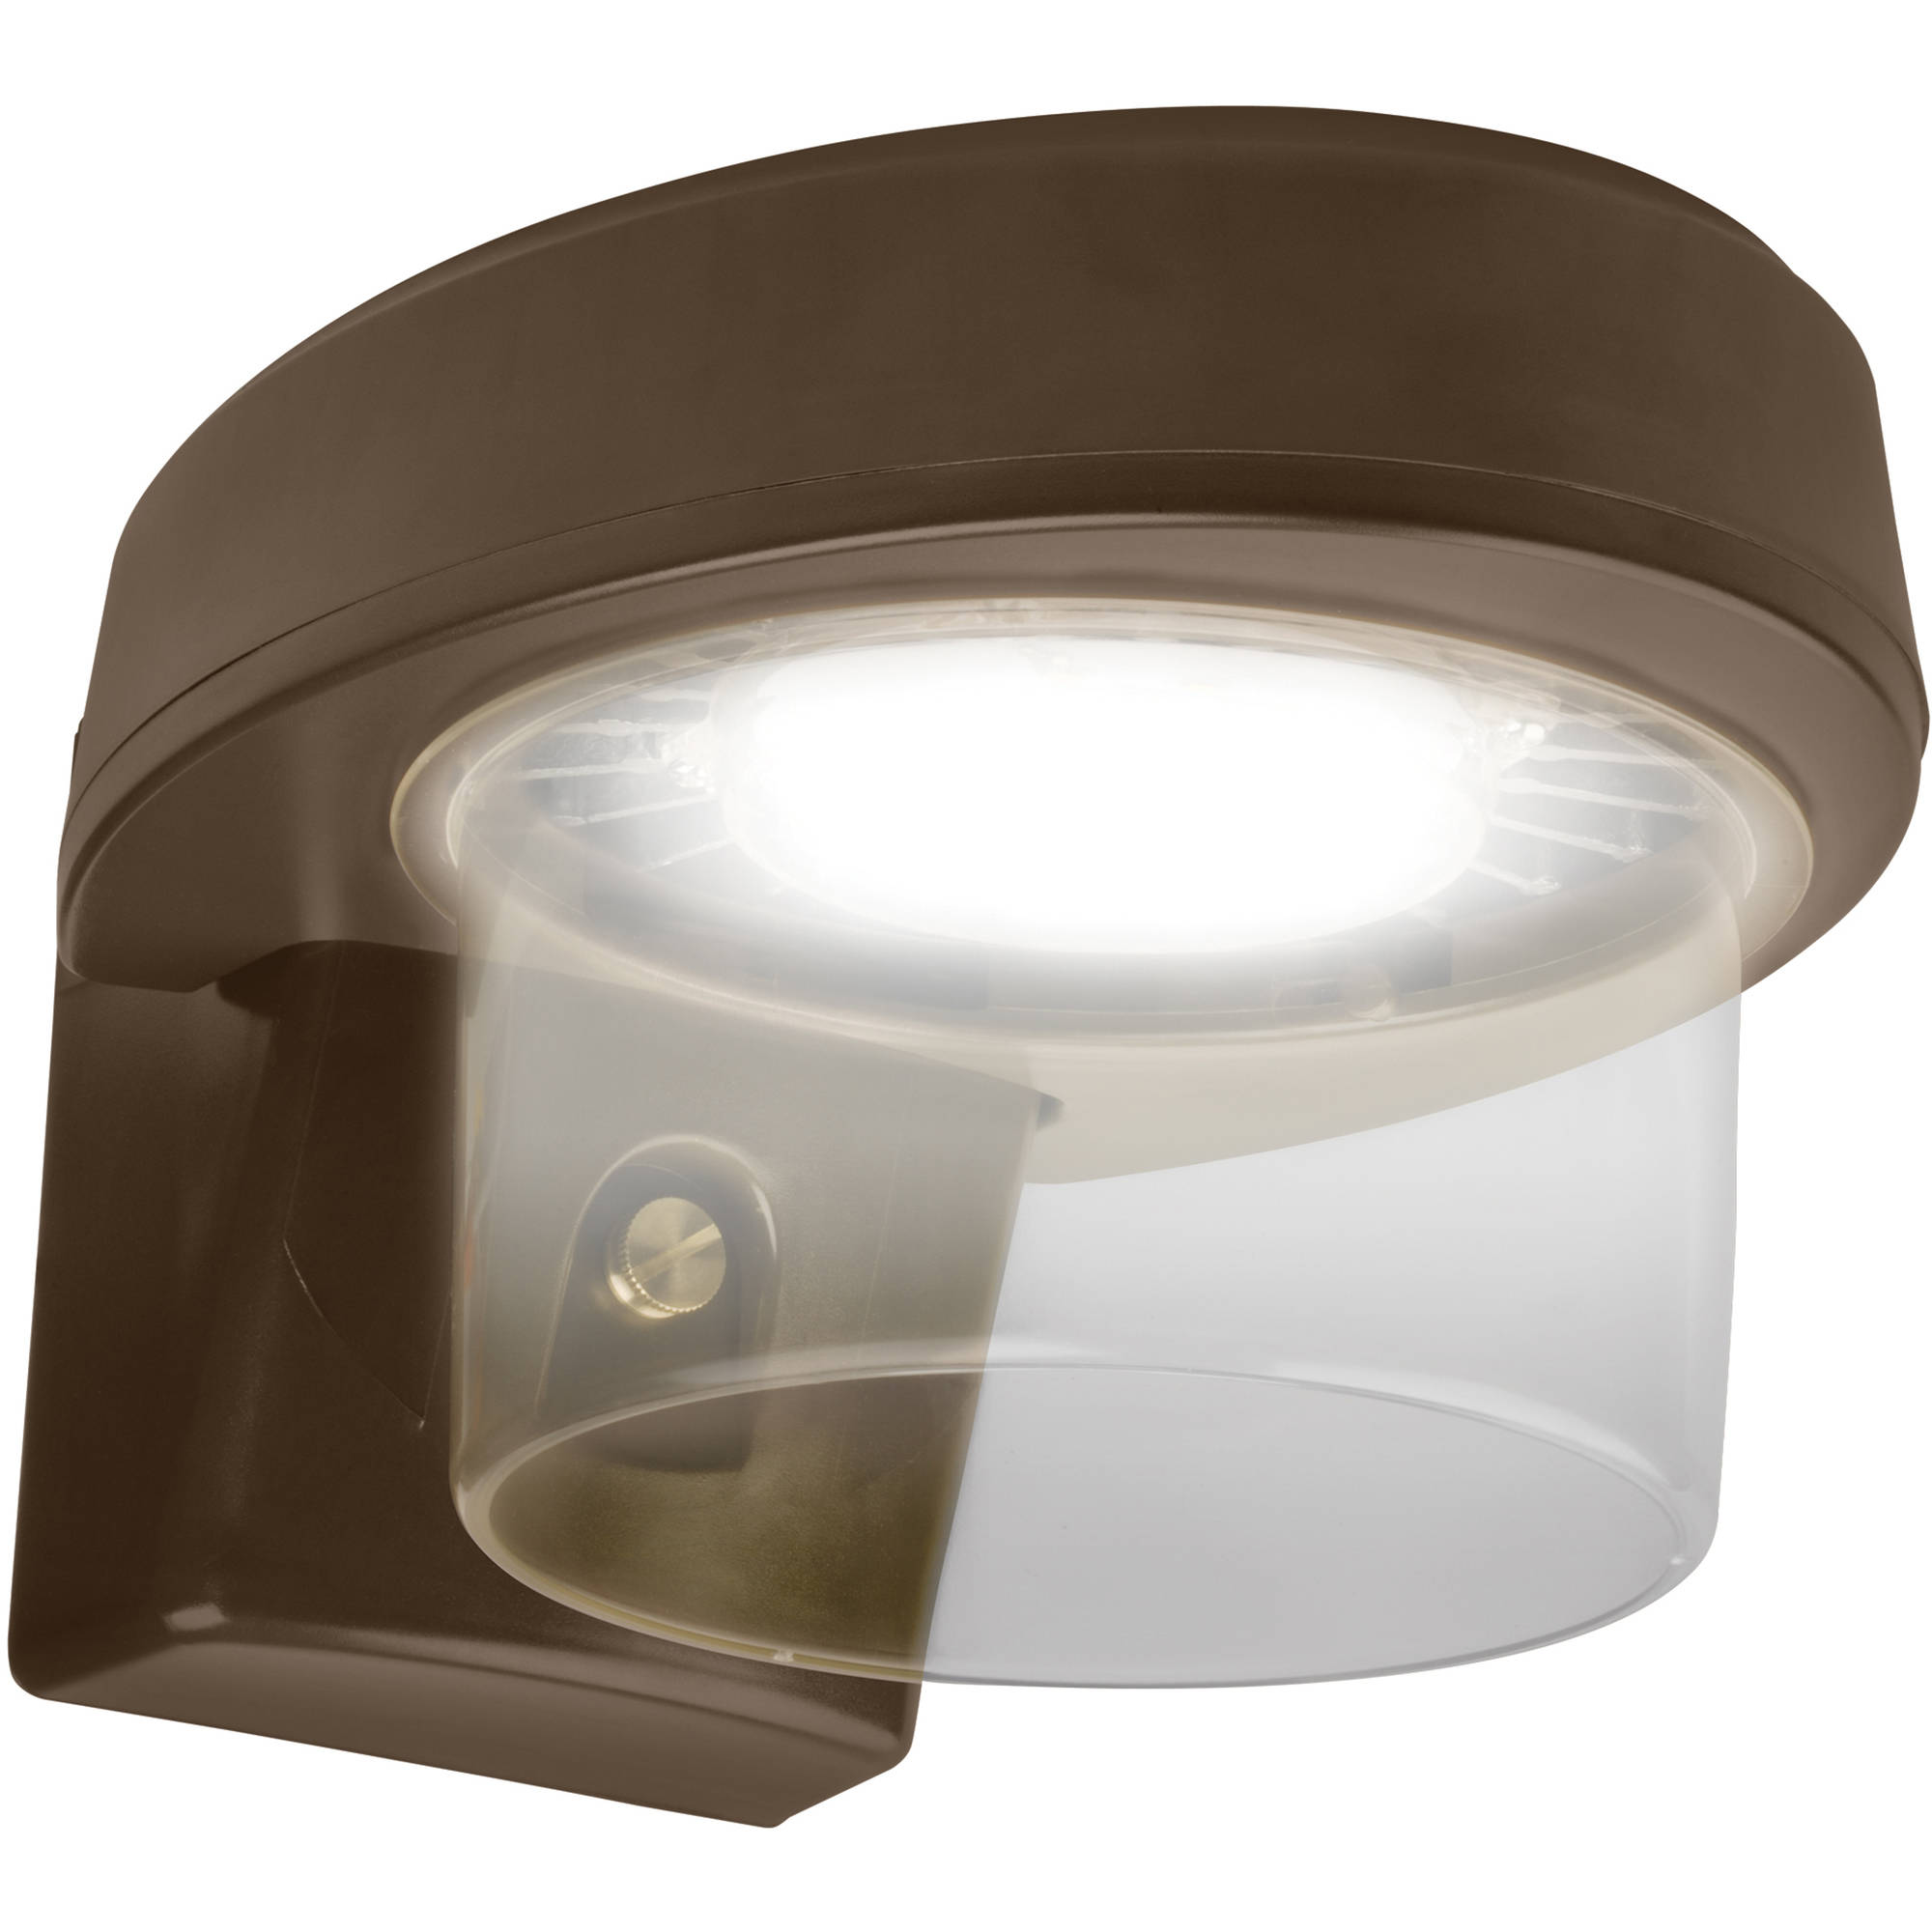 Brink's LED Dusk to Dawn Motion-Activated Security Light, Bronze Finish - image 1 of 2